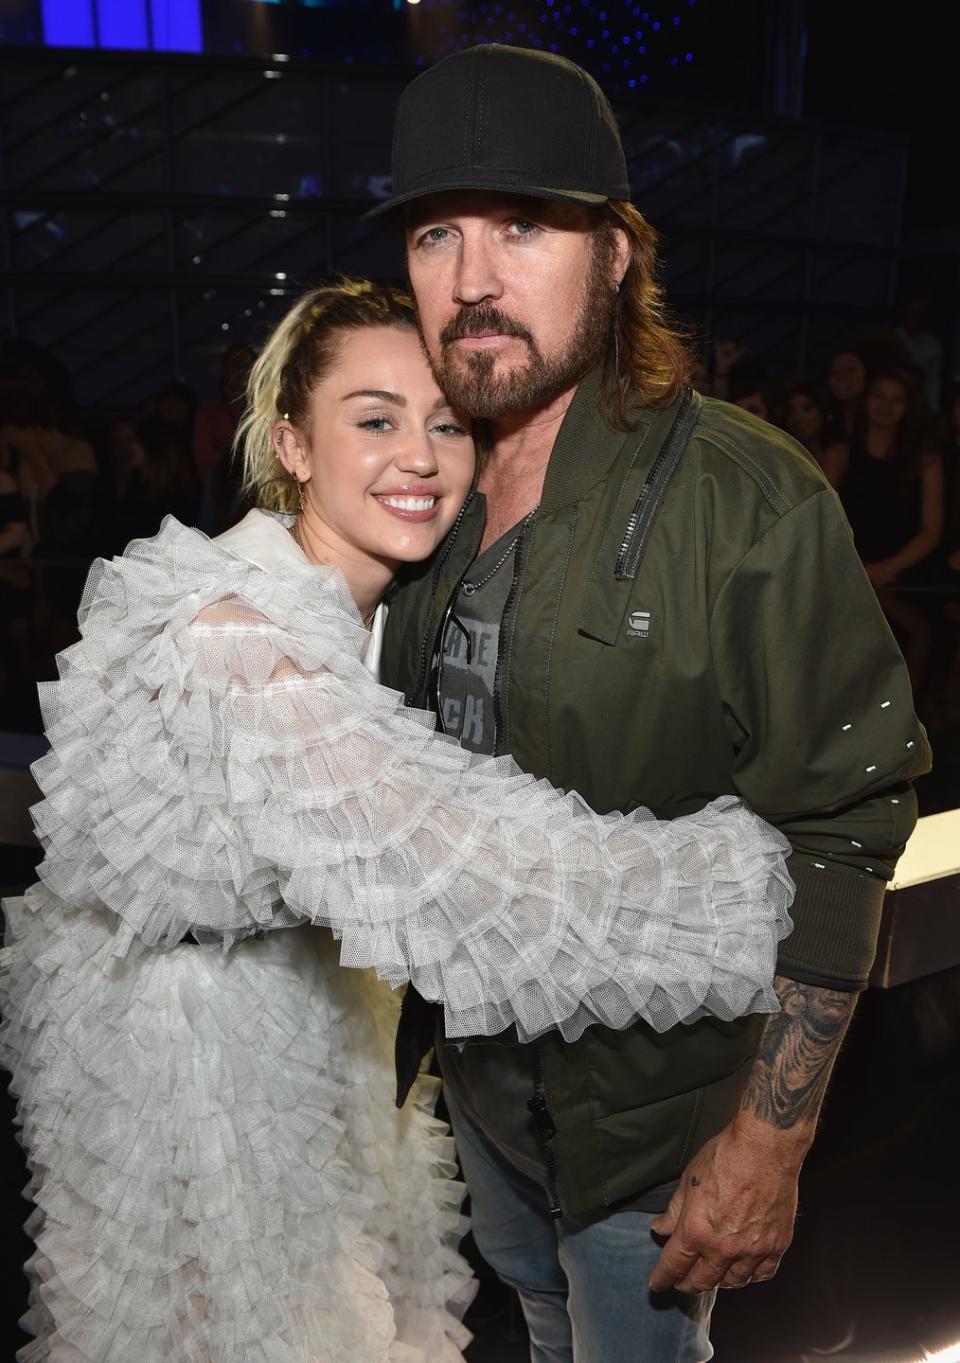 <p>While Miley Cyrus rose to fame alongside her dad on Disney Channel's <em>Hannah Montana</em>, we often forget Billy Ray Cyrus was famous in his own right as a country singer. So much so, that Dolly Parton is the pop singer's godmother.</p>